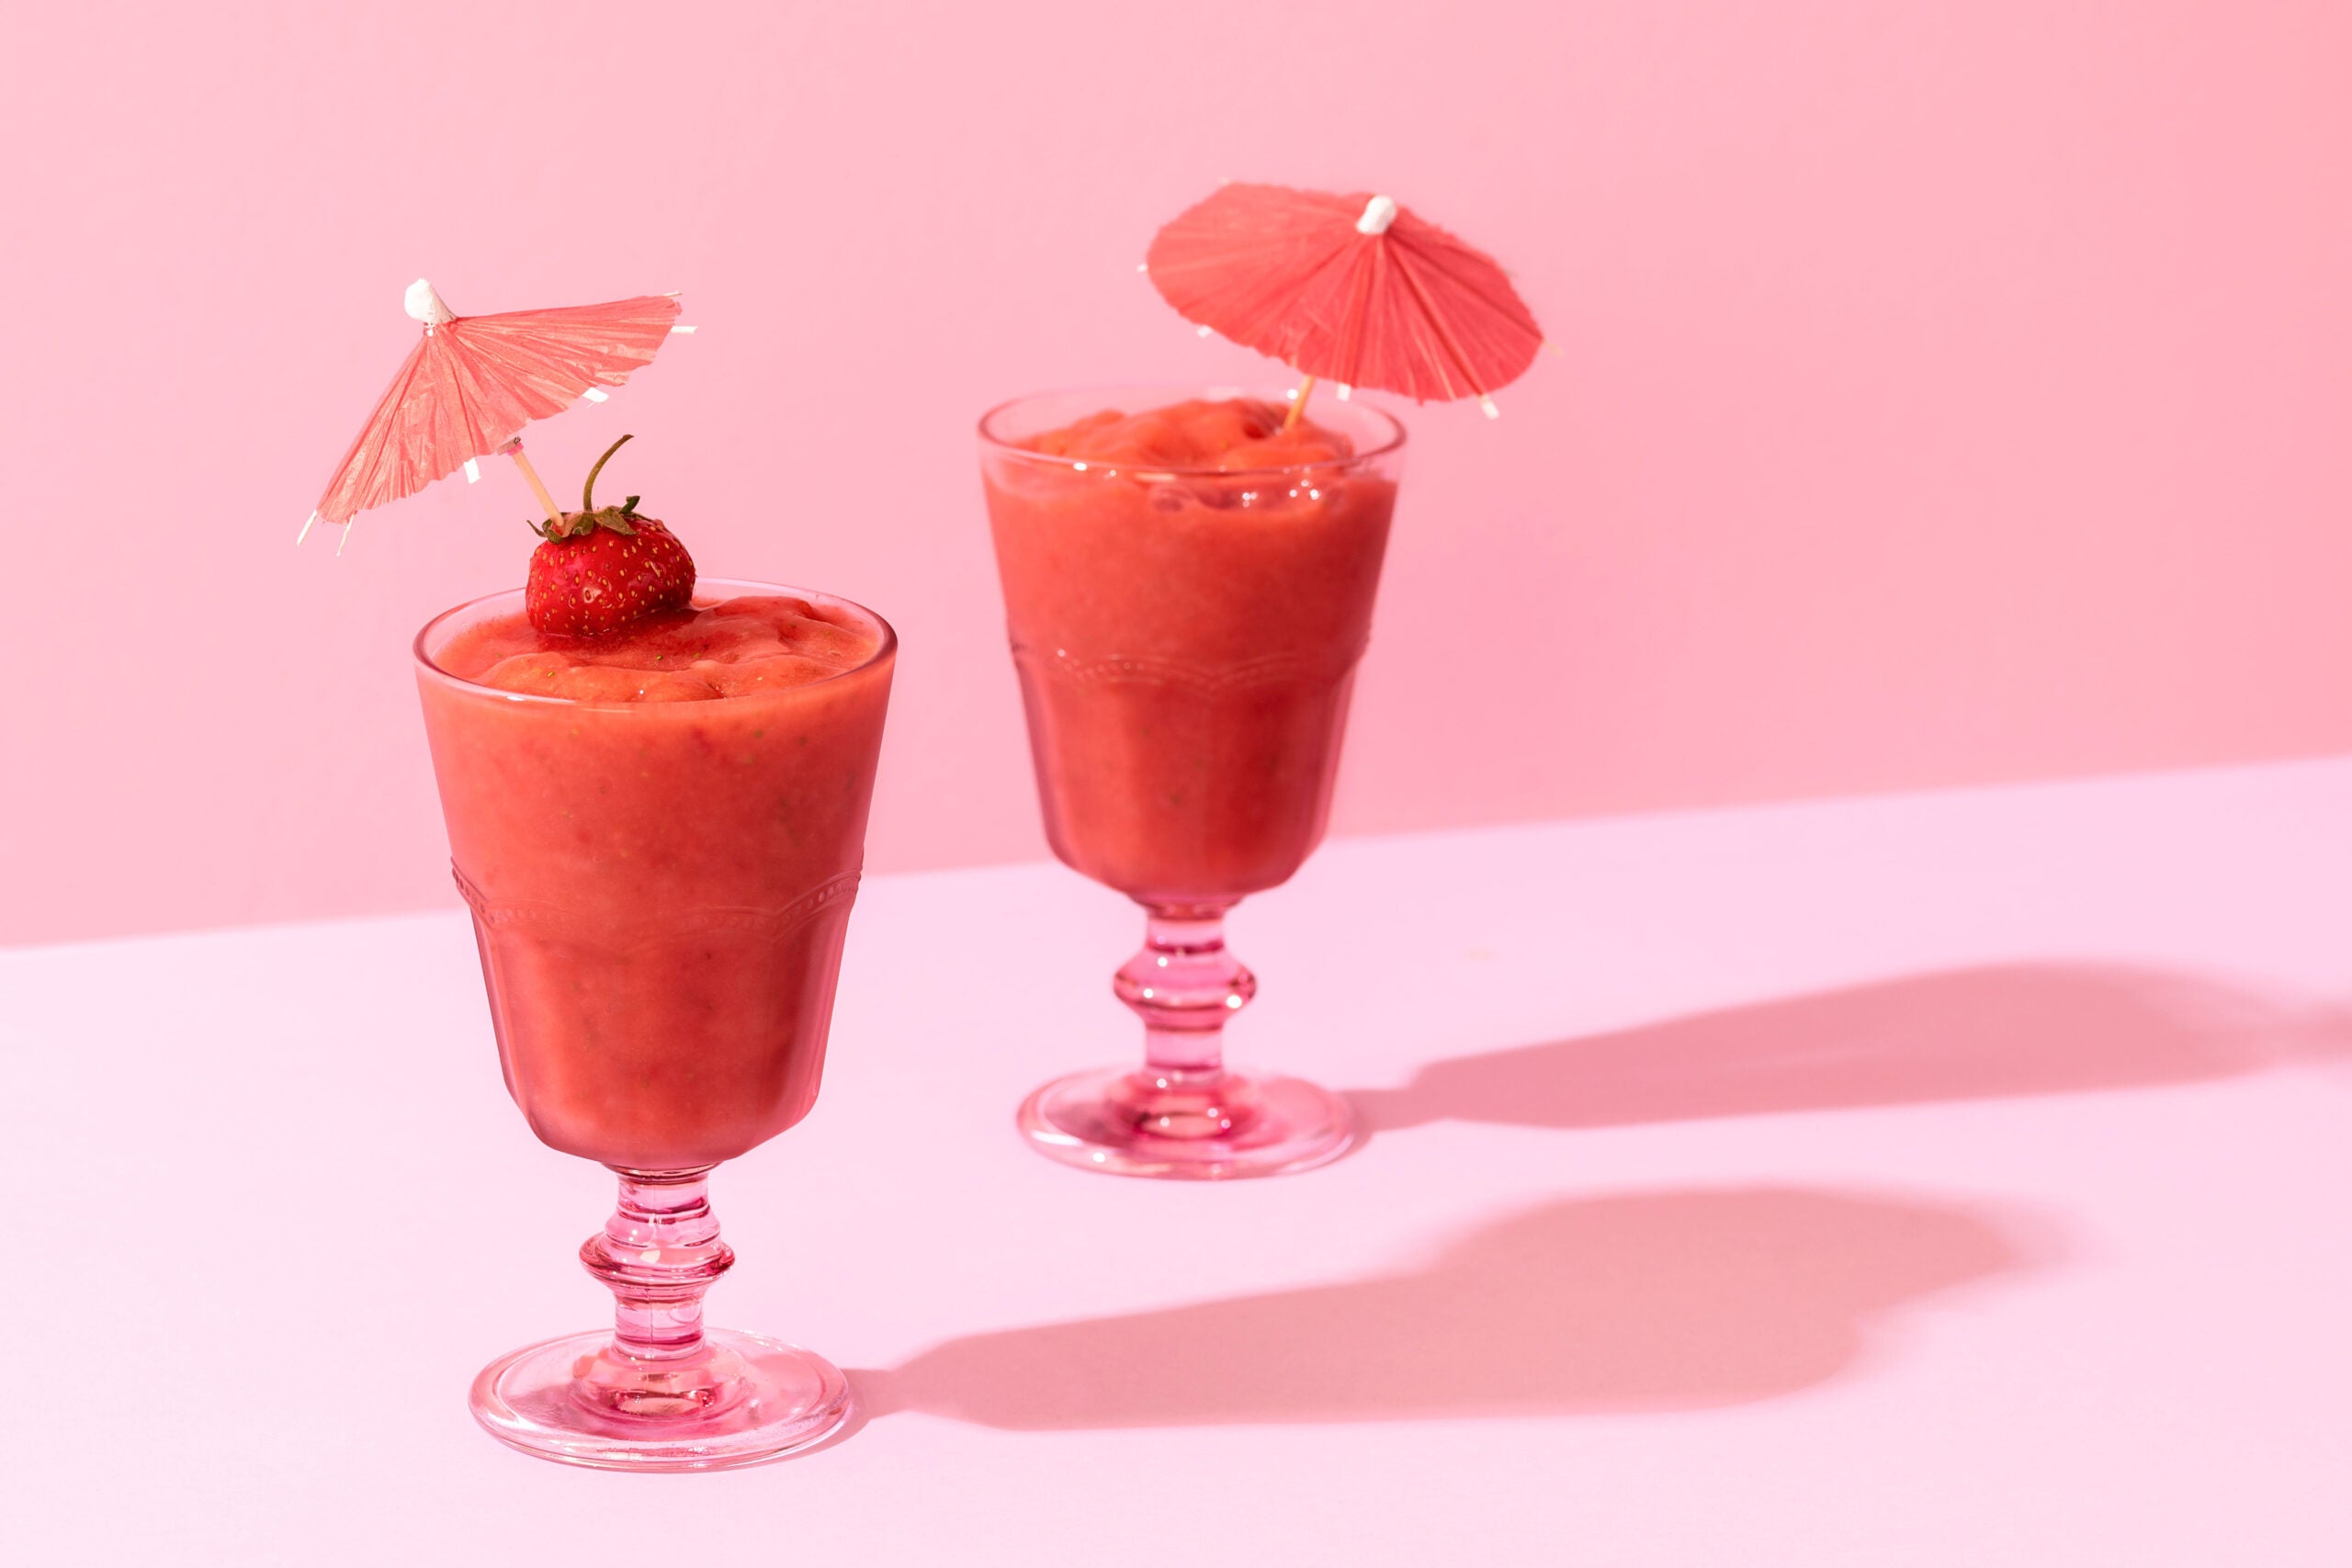 How To Make Frozen Drinks in a Blender: Tips